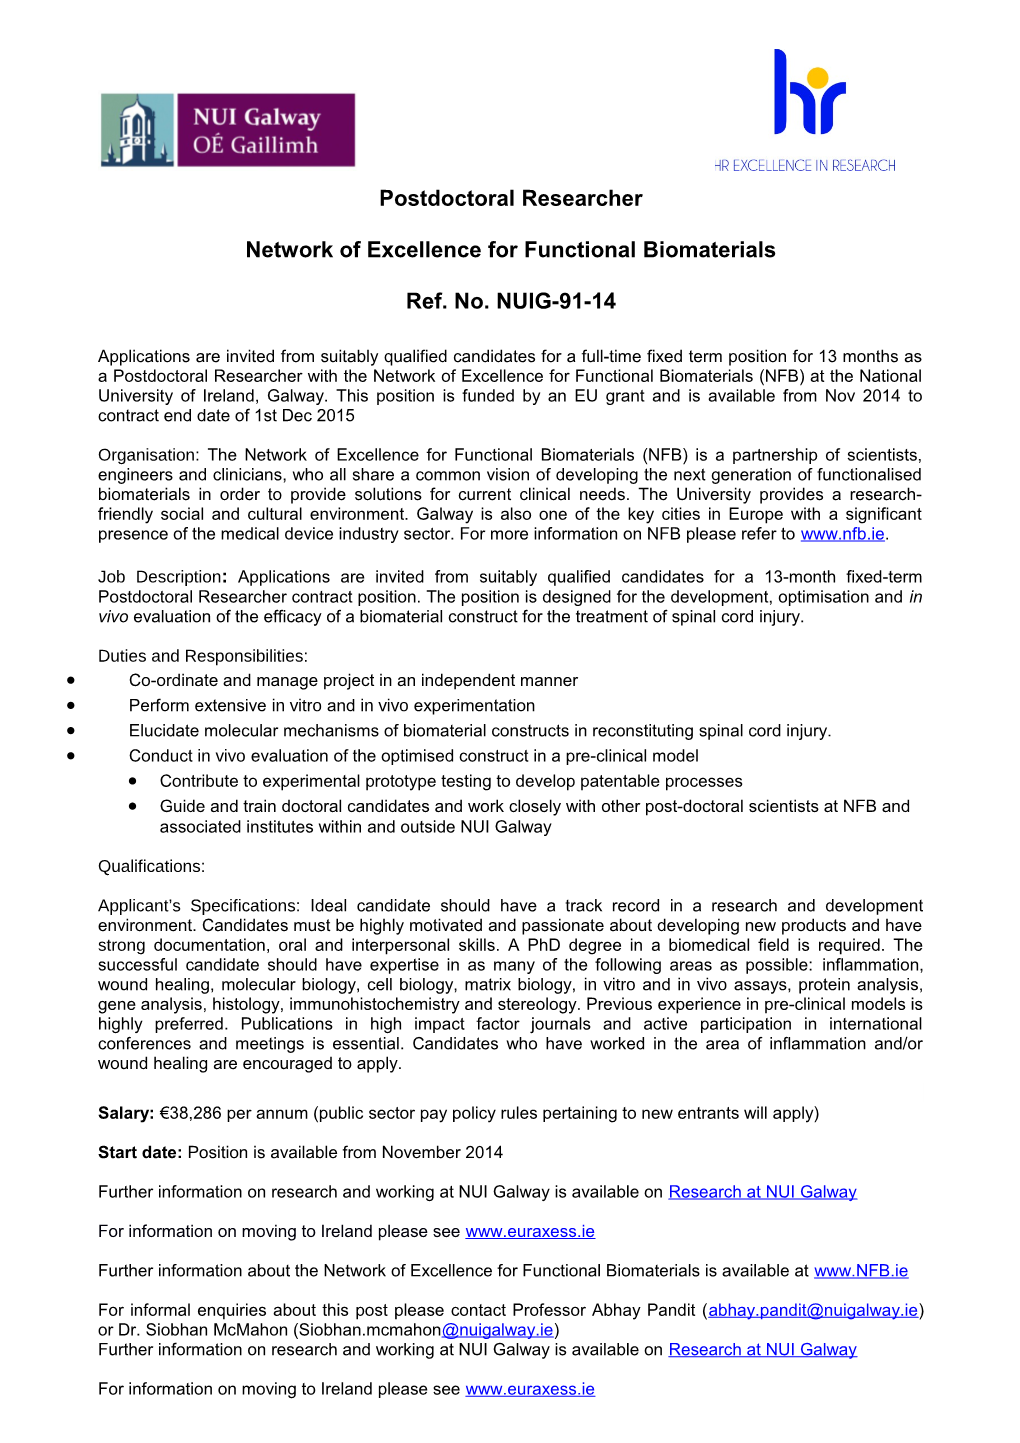 Network of Excellence for Functional Biomaterials